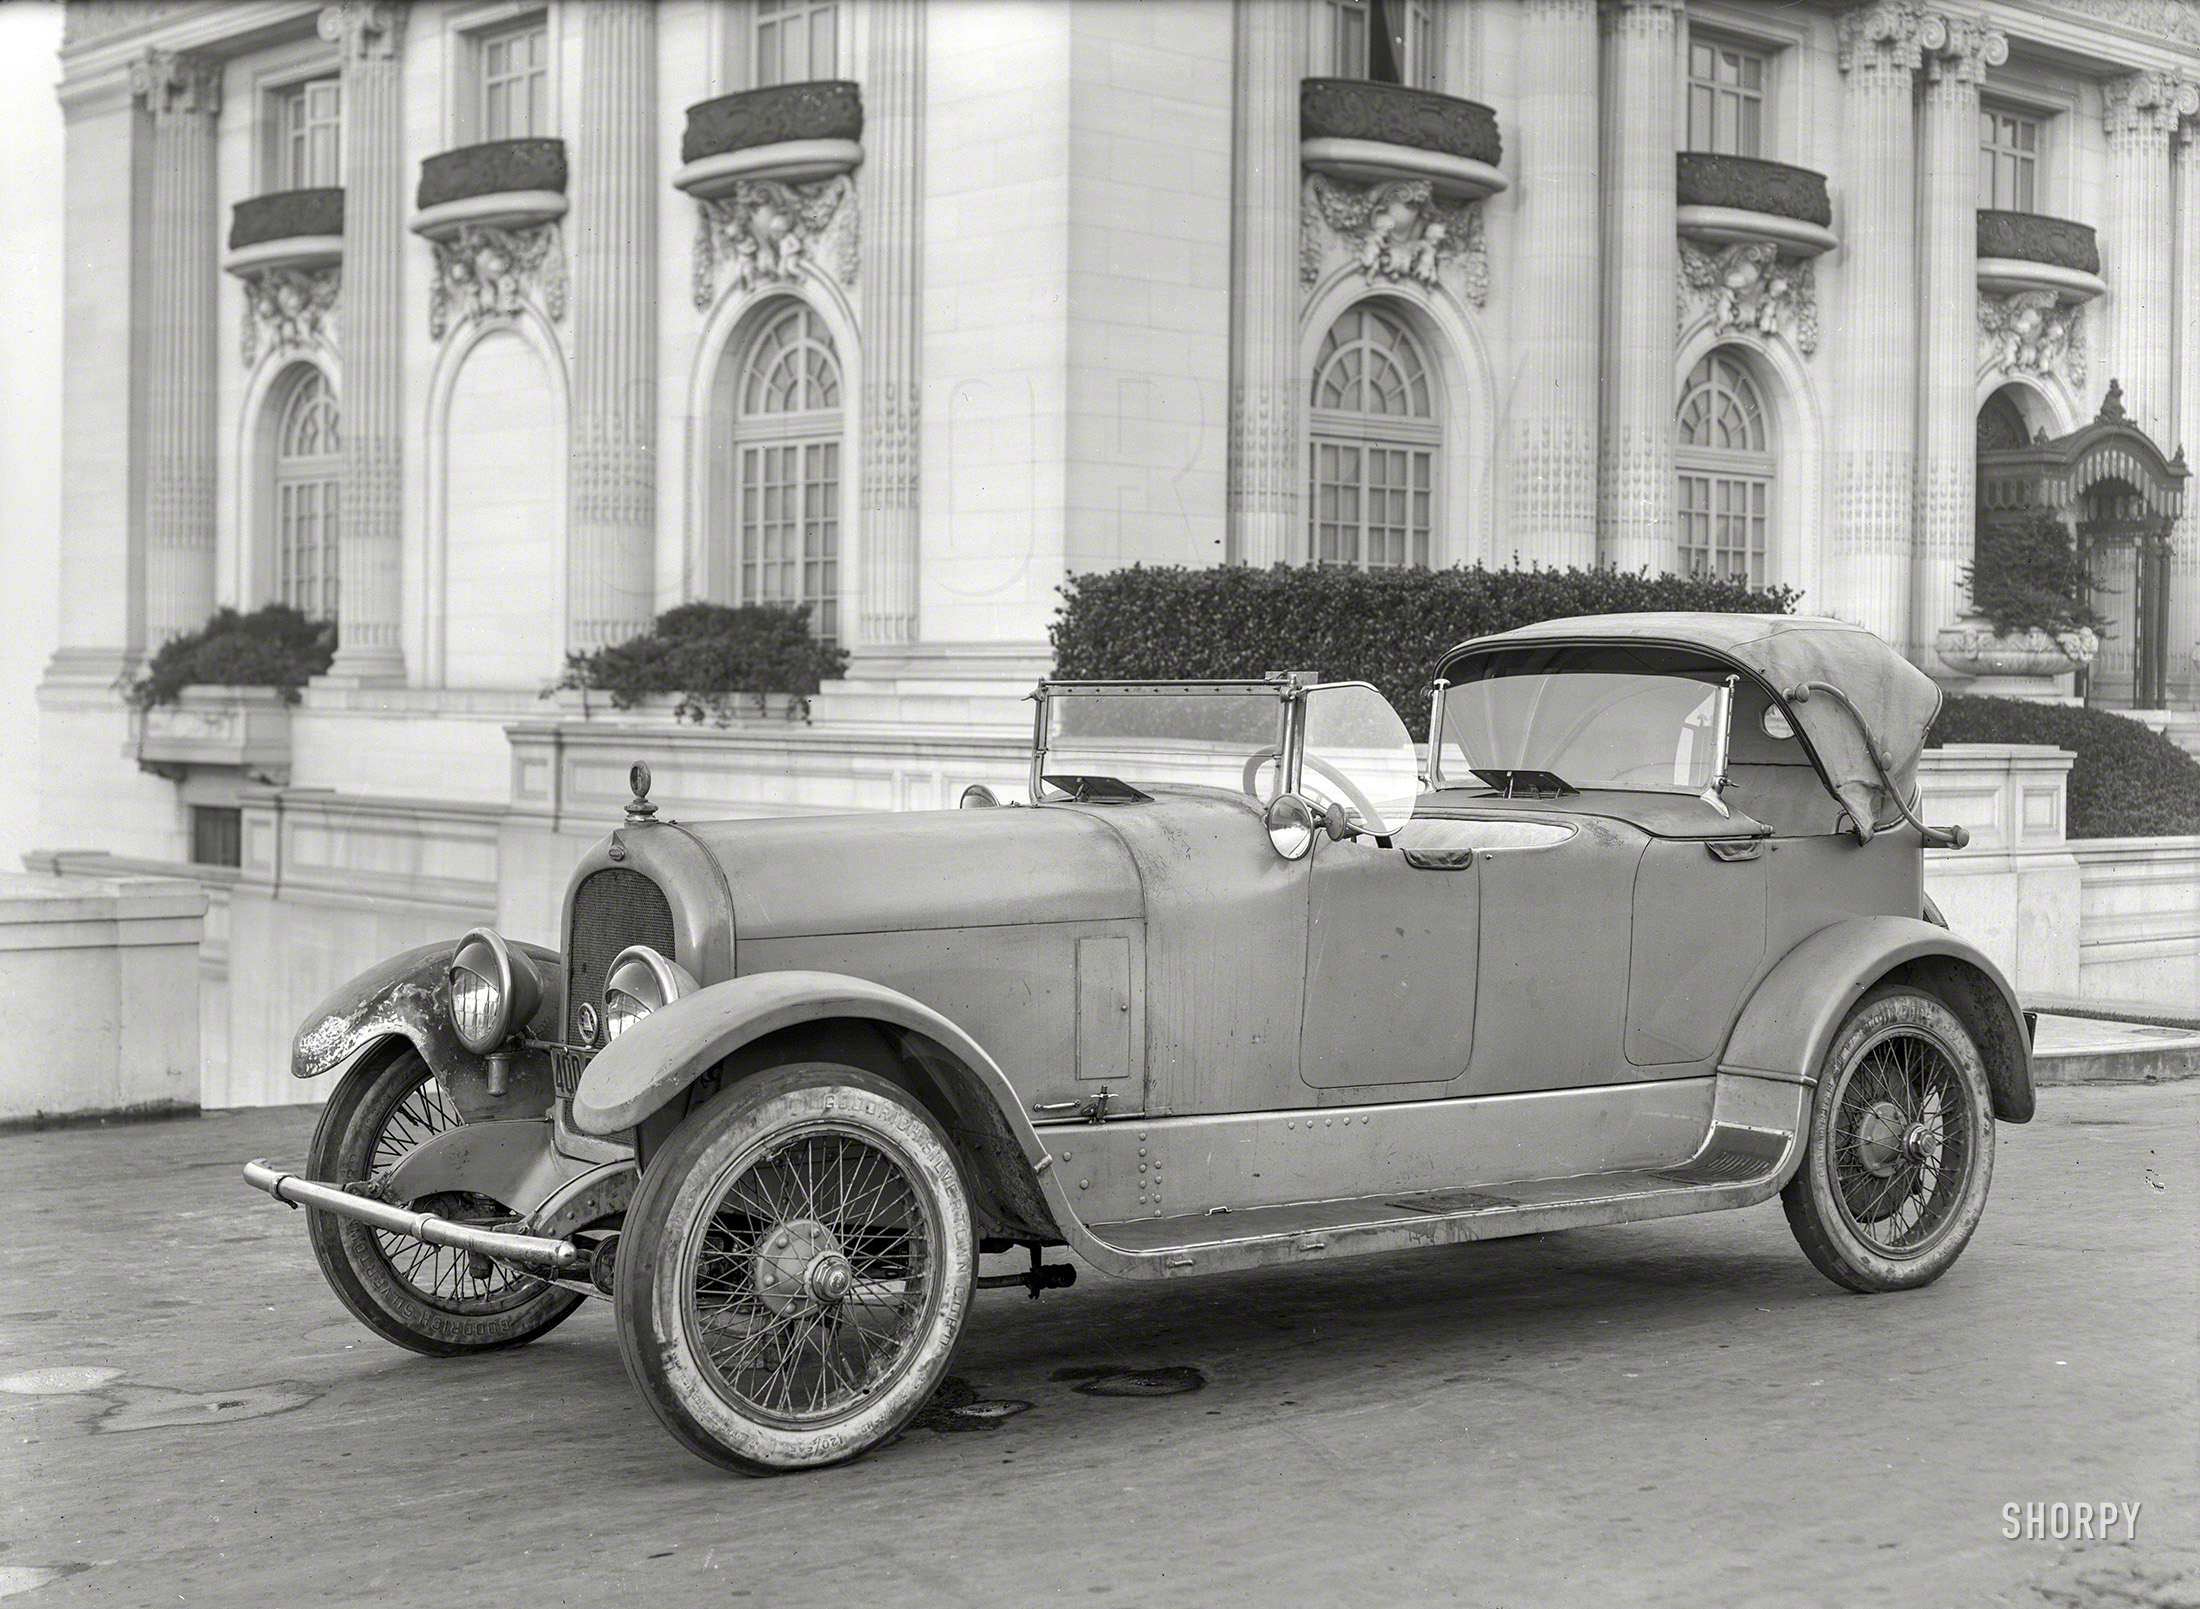 San Francisco circa 1921. "Marmon dual-cowl landaulet at Spreckels Mansion." A car that looks like it's been around the block a few times. Latest entry in the Shorpy Catalogue of Creaky Conveyances.  5x7 glass negative. View full size.